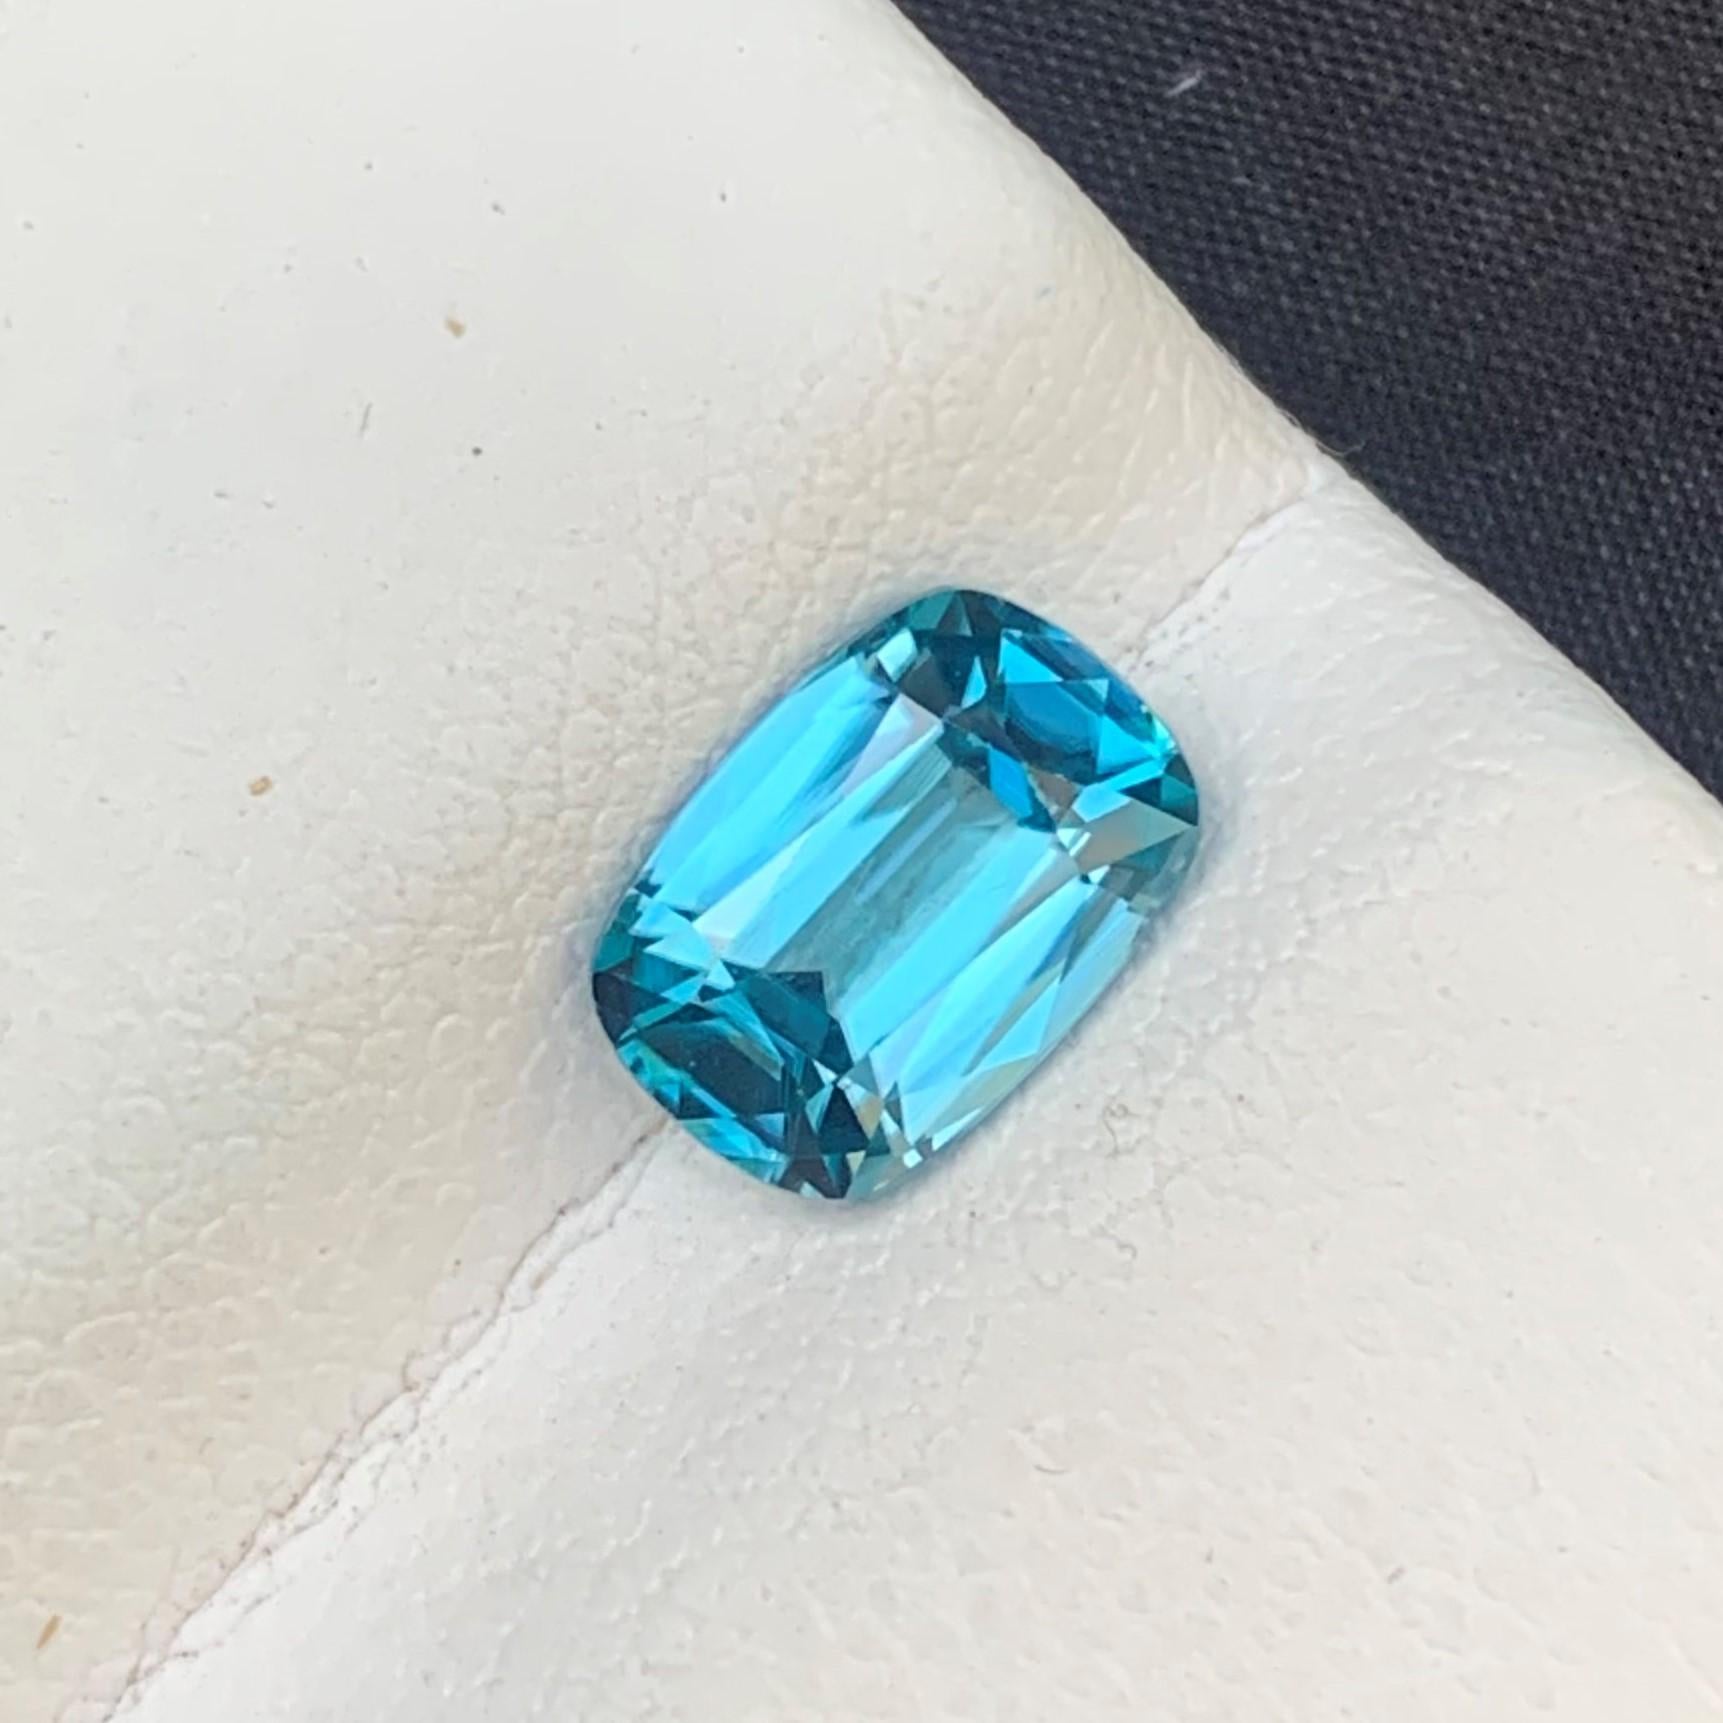 Faceted Zircon
Weight: 1.90 Carats
Dimension: 8.2x5.7x3.8 Mm
Origin: Cambodia
Shape: Cushion
Color: Blue
Certificate: On Demand
Blue zircon, in particular, is the alternative birthstone for December. Color differences in zircon are caused by